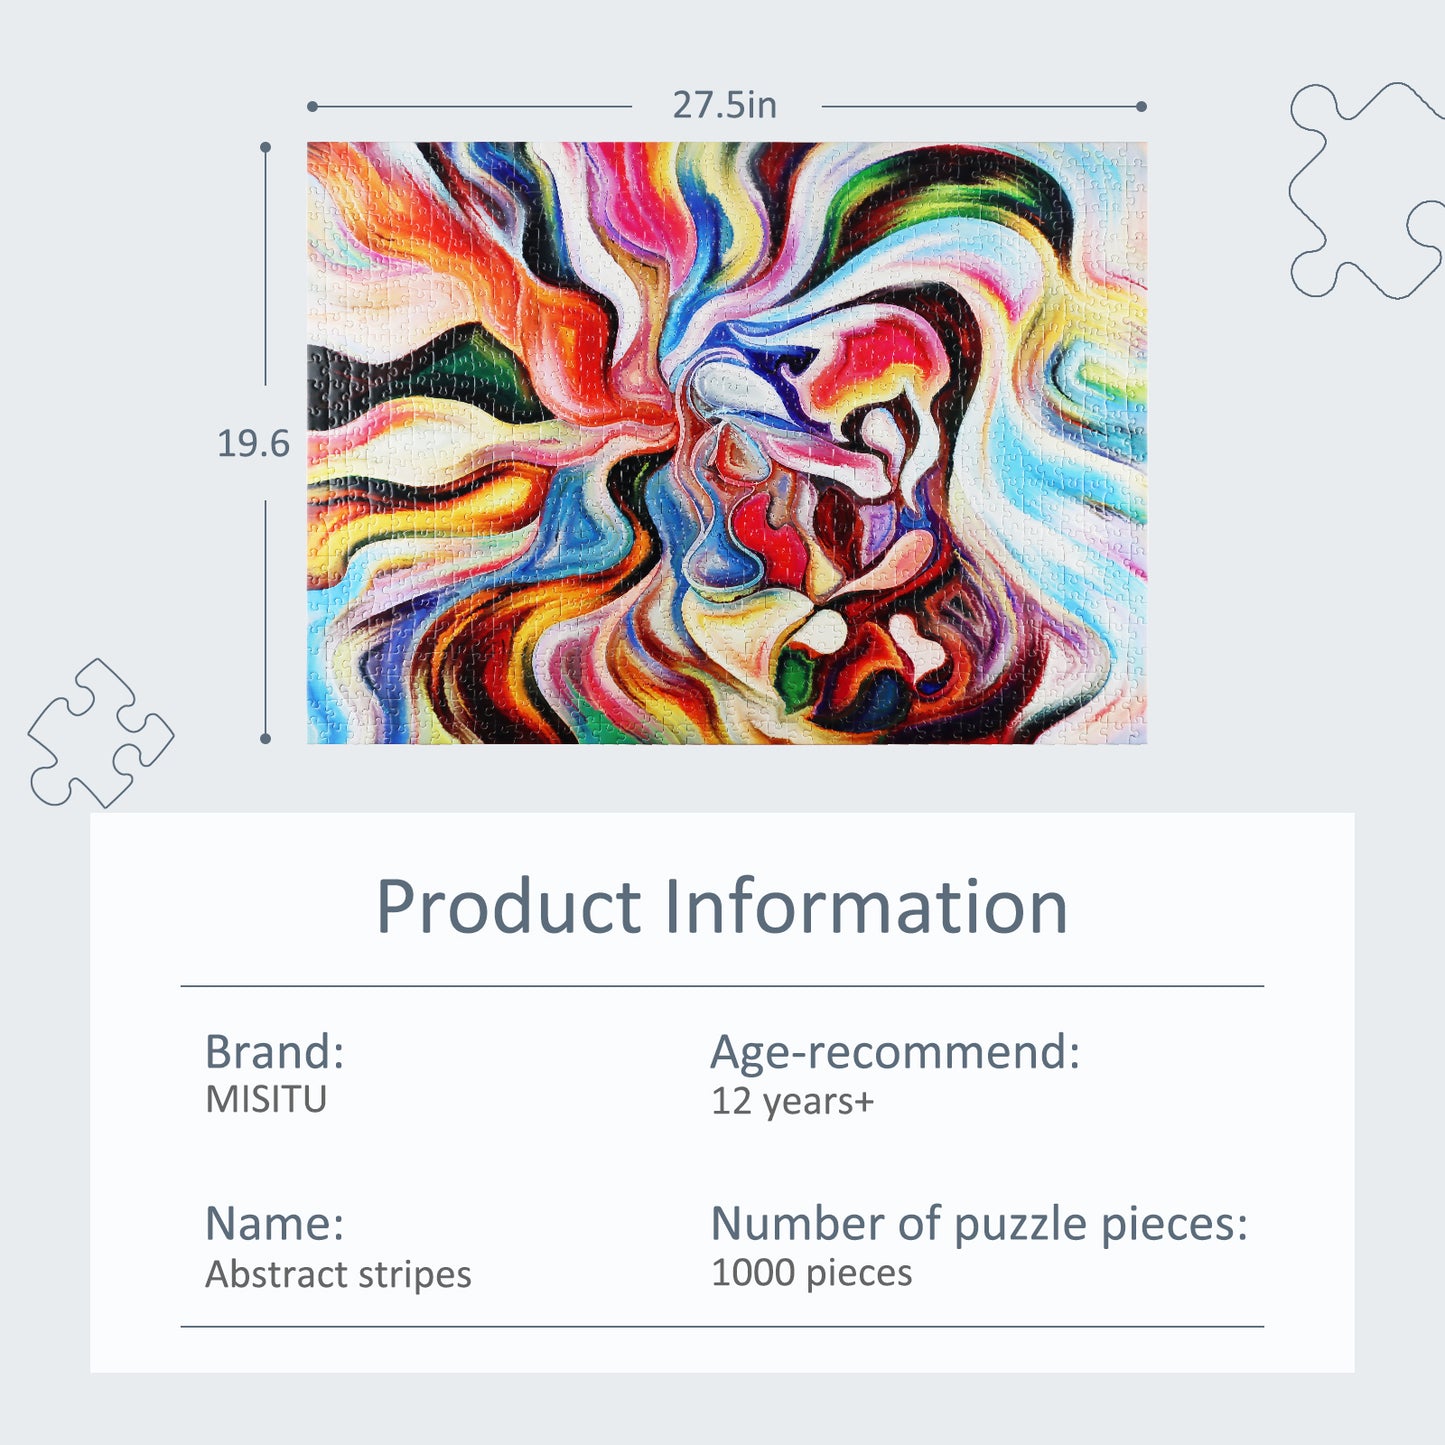 MISITU Puzzle Abstract Colorful Strips Jigsaw Puzzles 1000 Pieces Puzzles for Adults 28 x 20 Inches